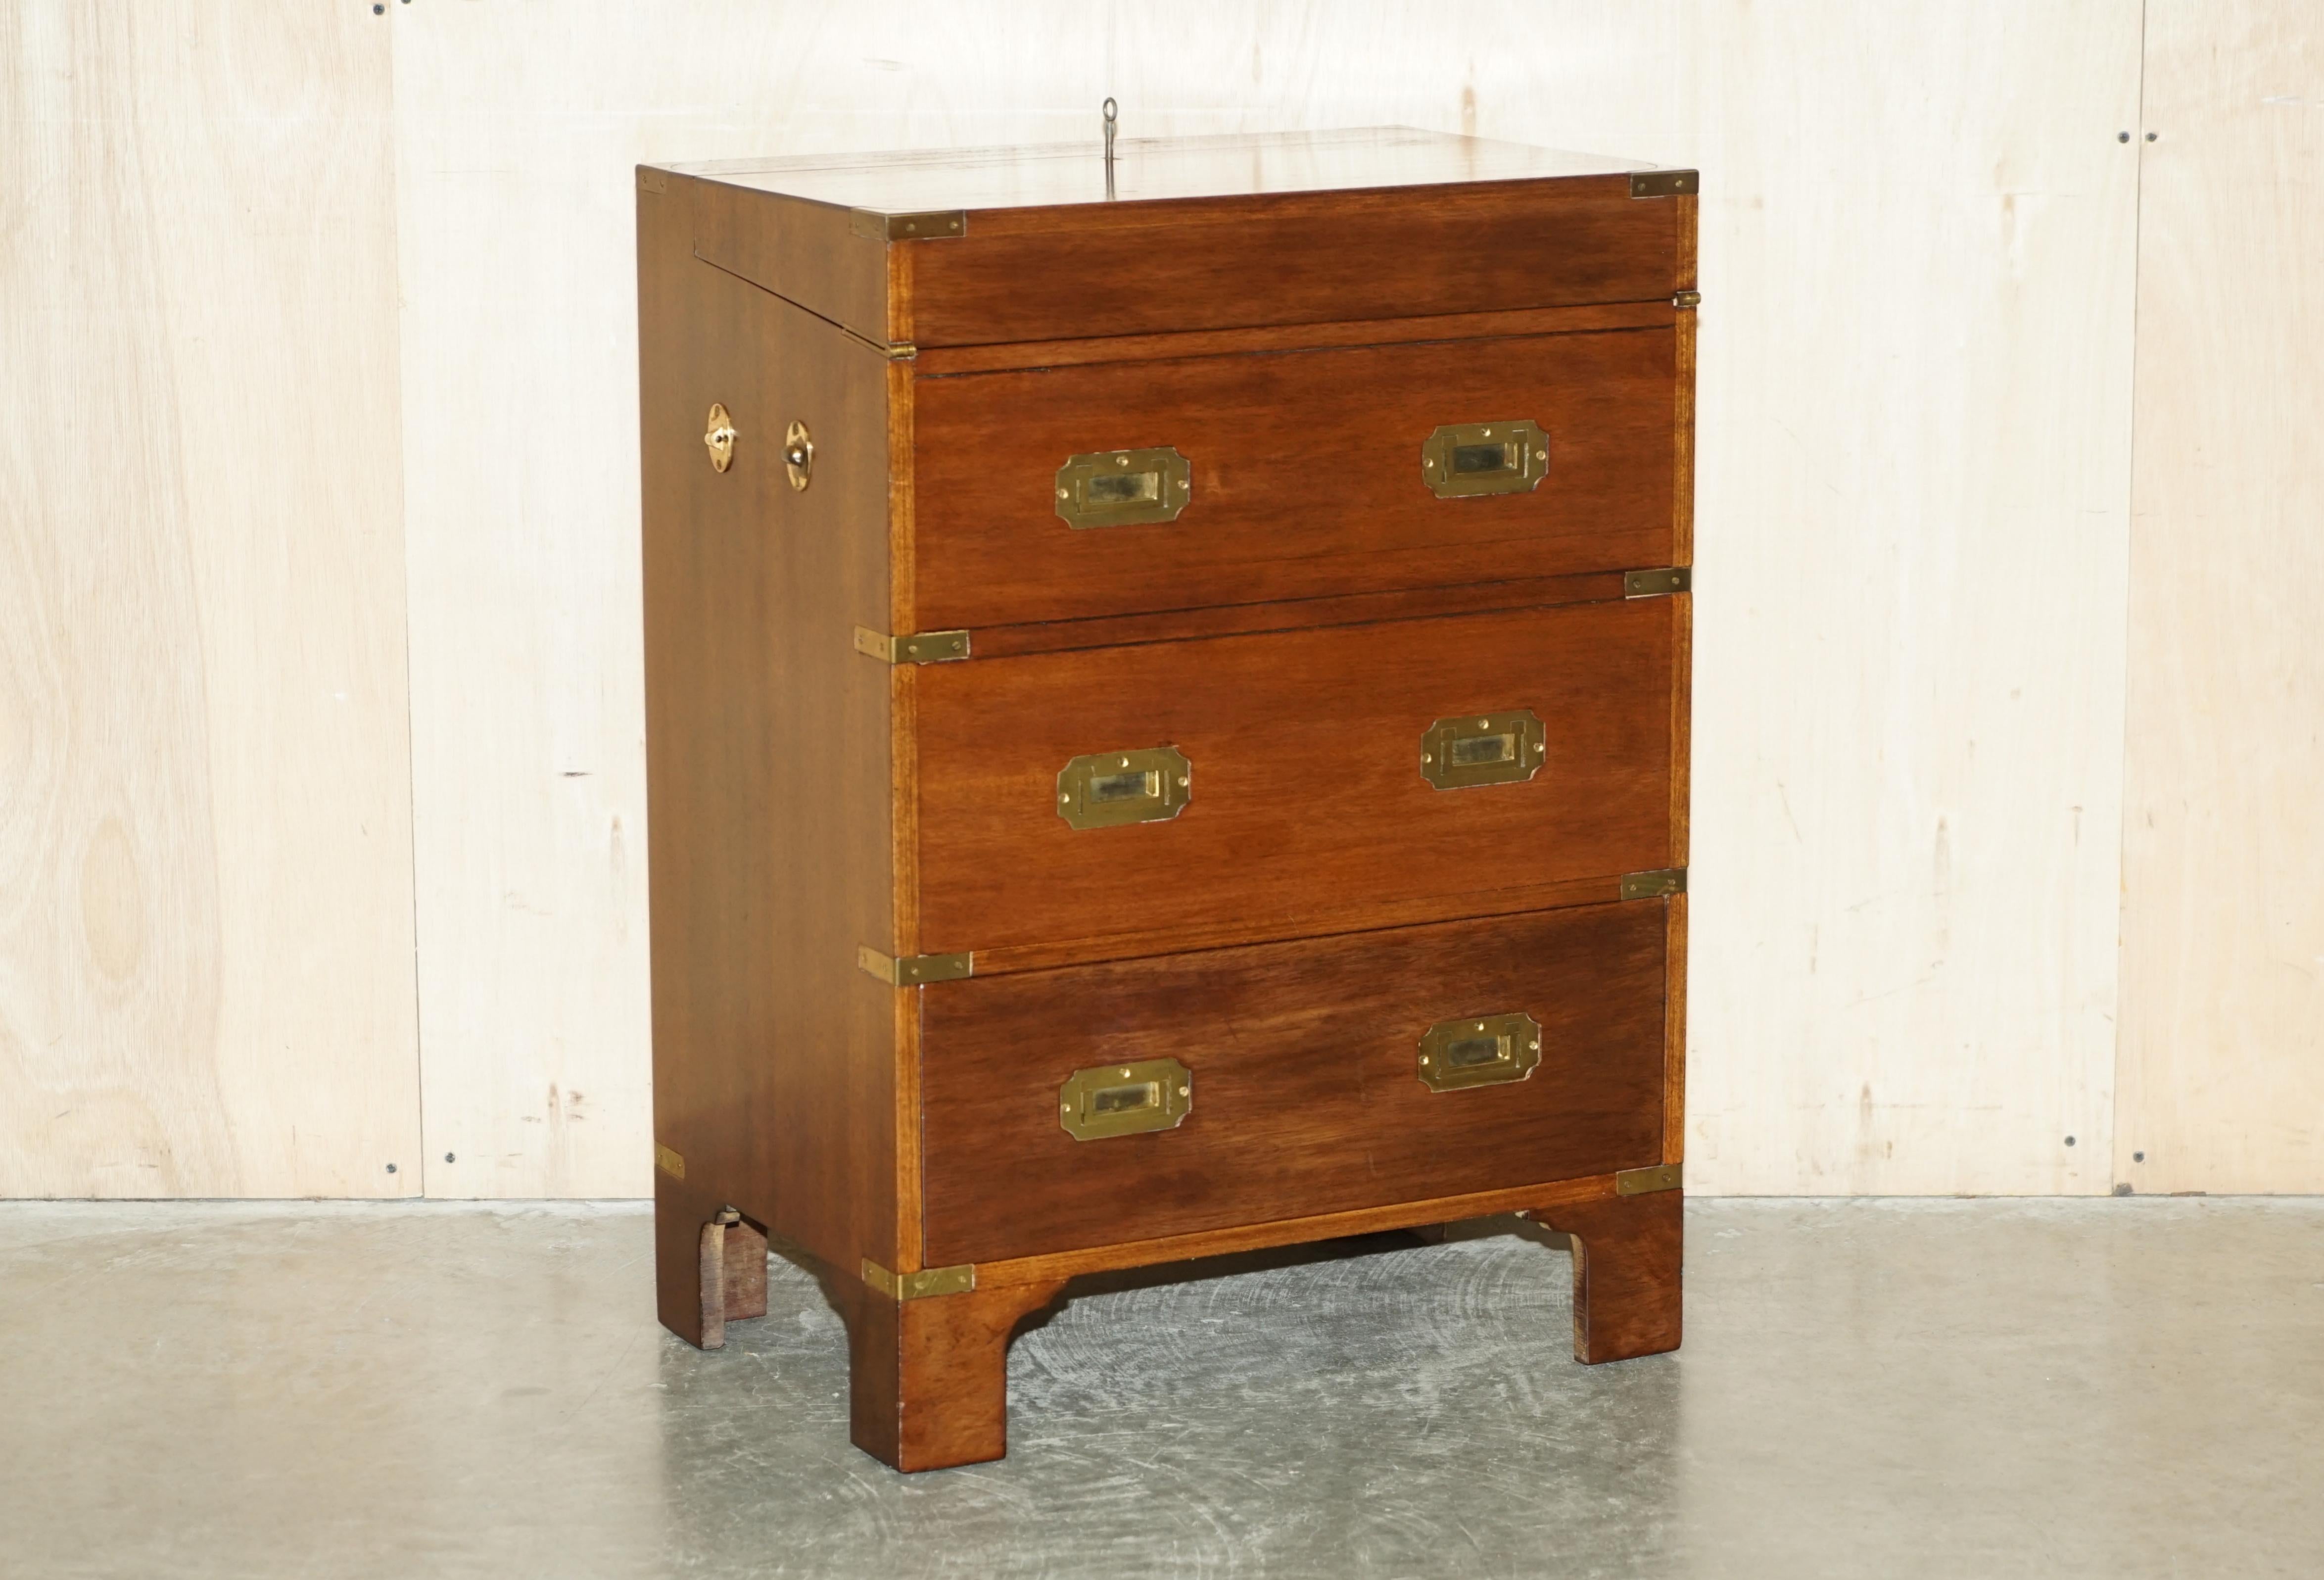 We are delighted to offer for sale this stunning circa 1920 Mahogany, Military Campaign side table sides drawers unit which houses a drinks cabinet

A very good looking well made and decorative piece, the drawers are faux apart from the bottom one